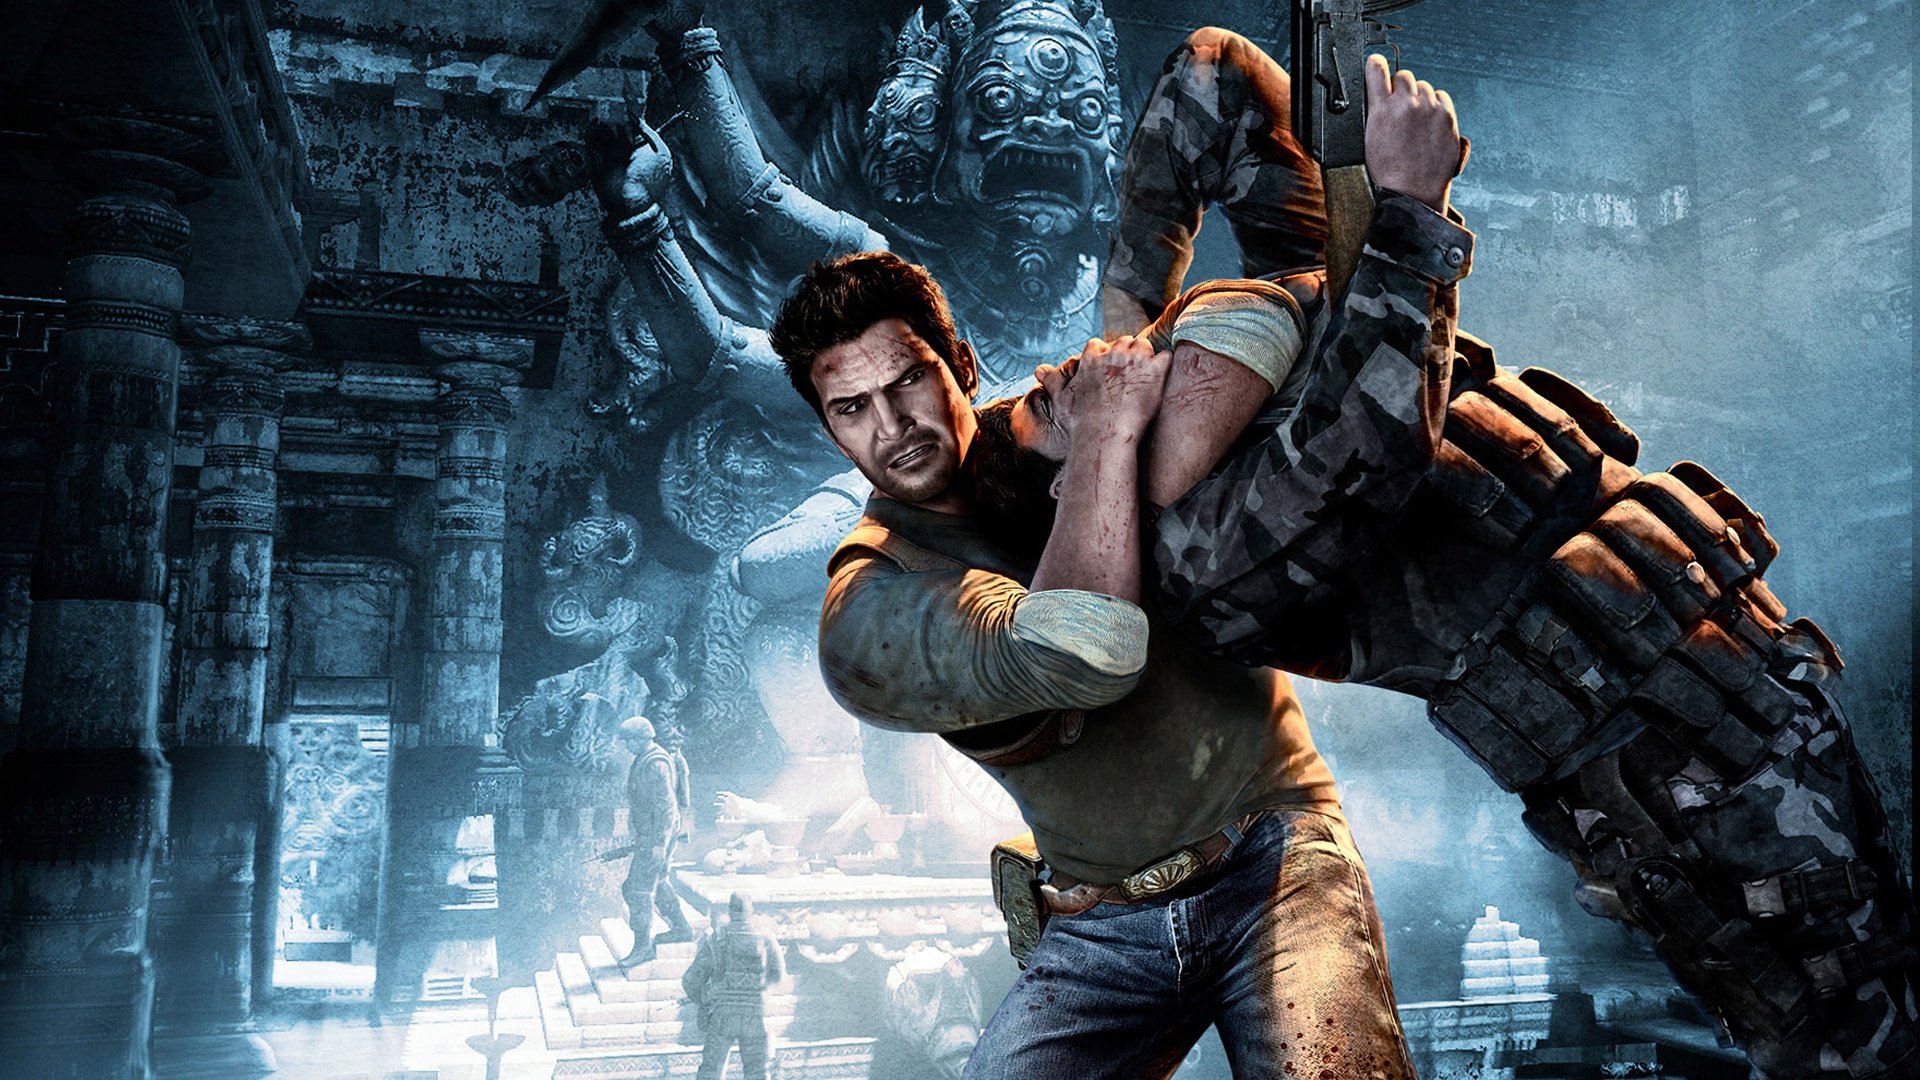 uncharted-2-3-and-the-last-of-us-ps3-multiplayer-servers-go-offline-tomorrow-push-square